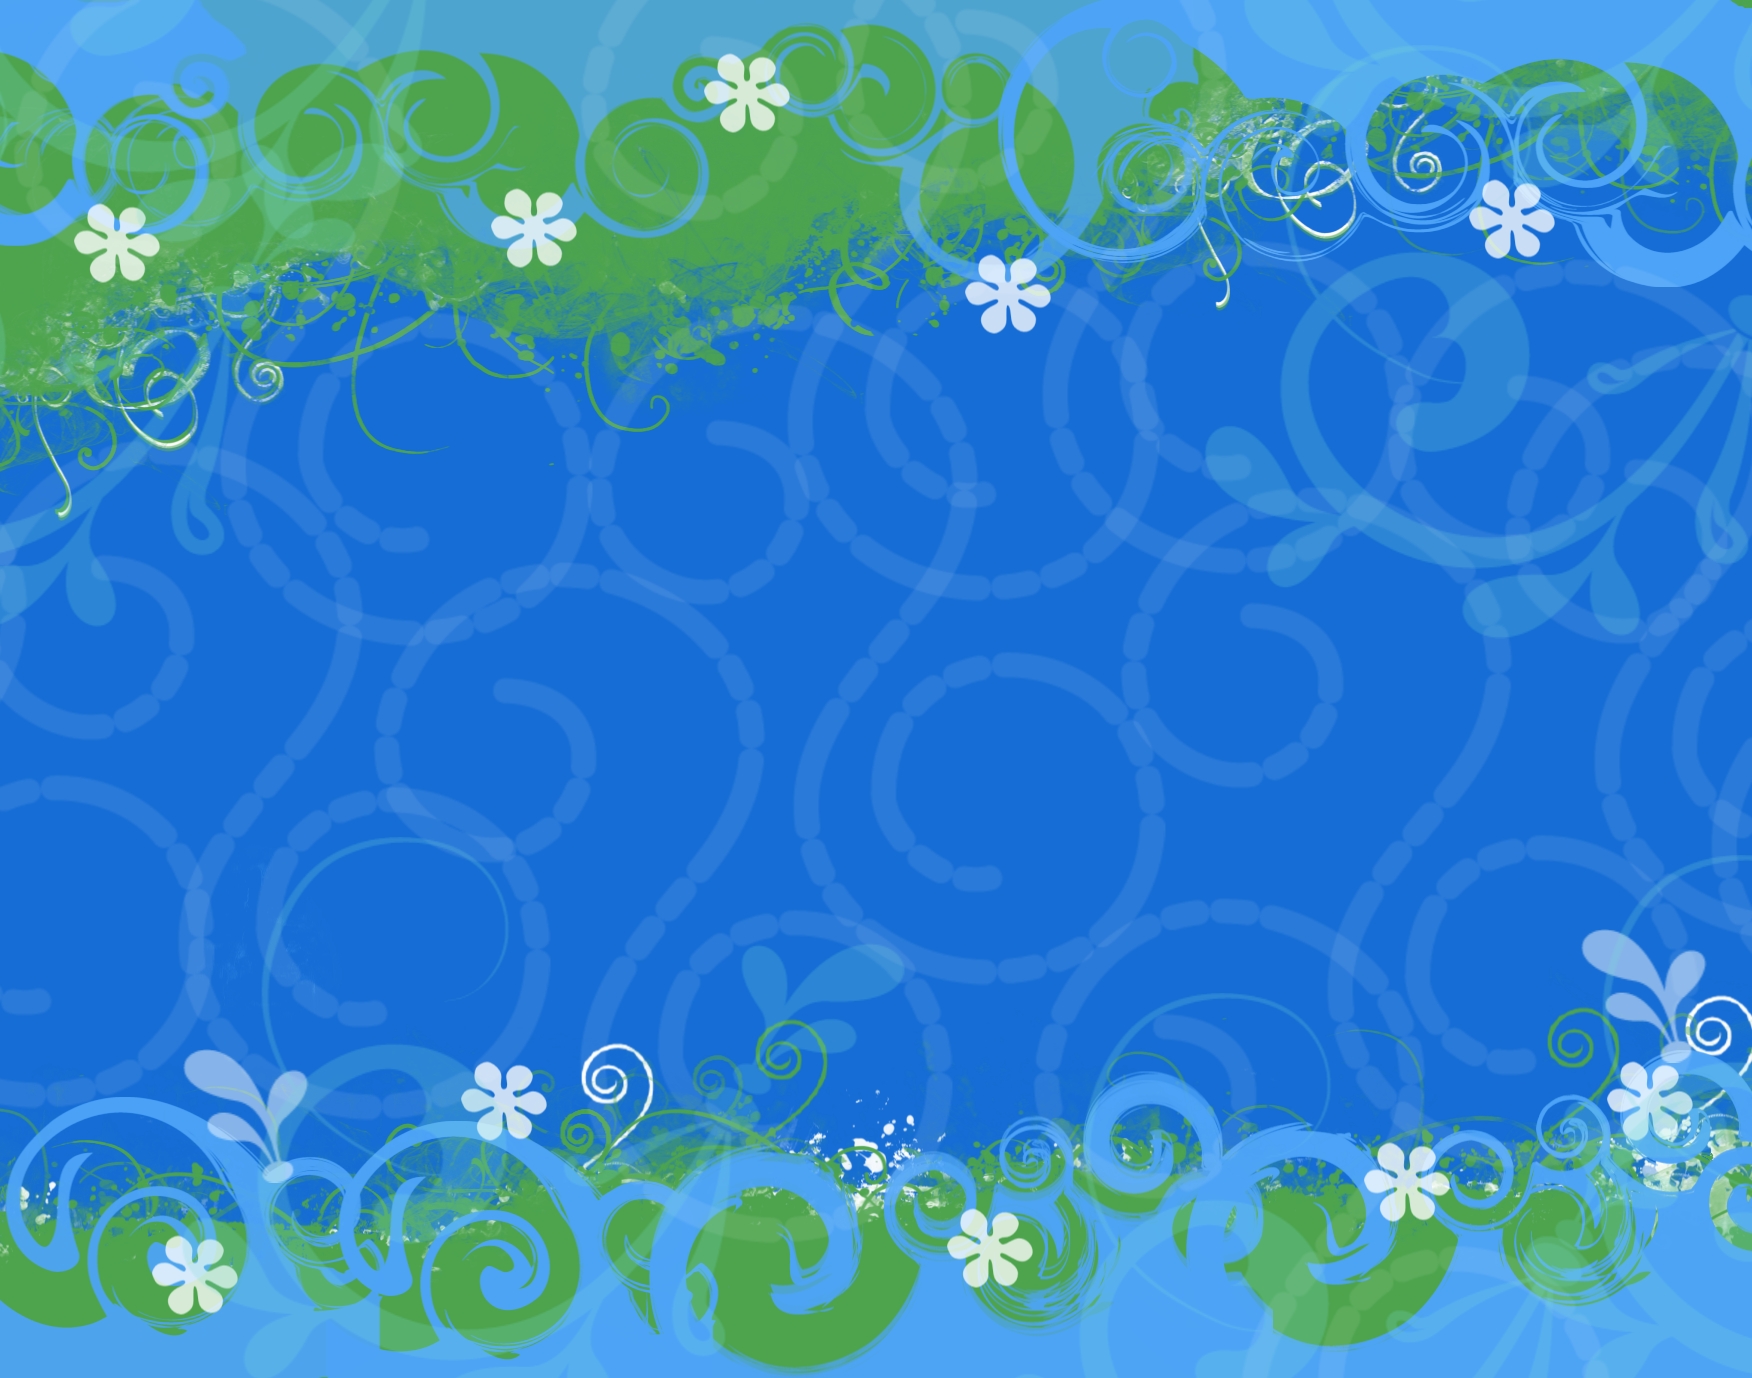 Happy Day Flower Waves free powerpoint background